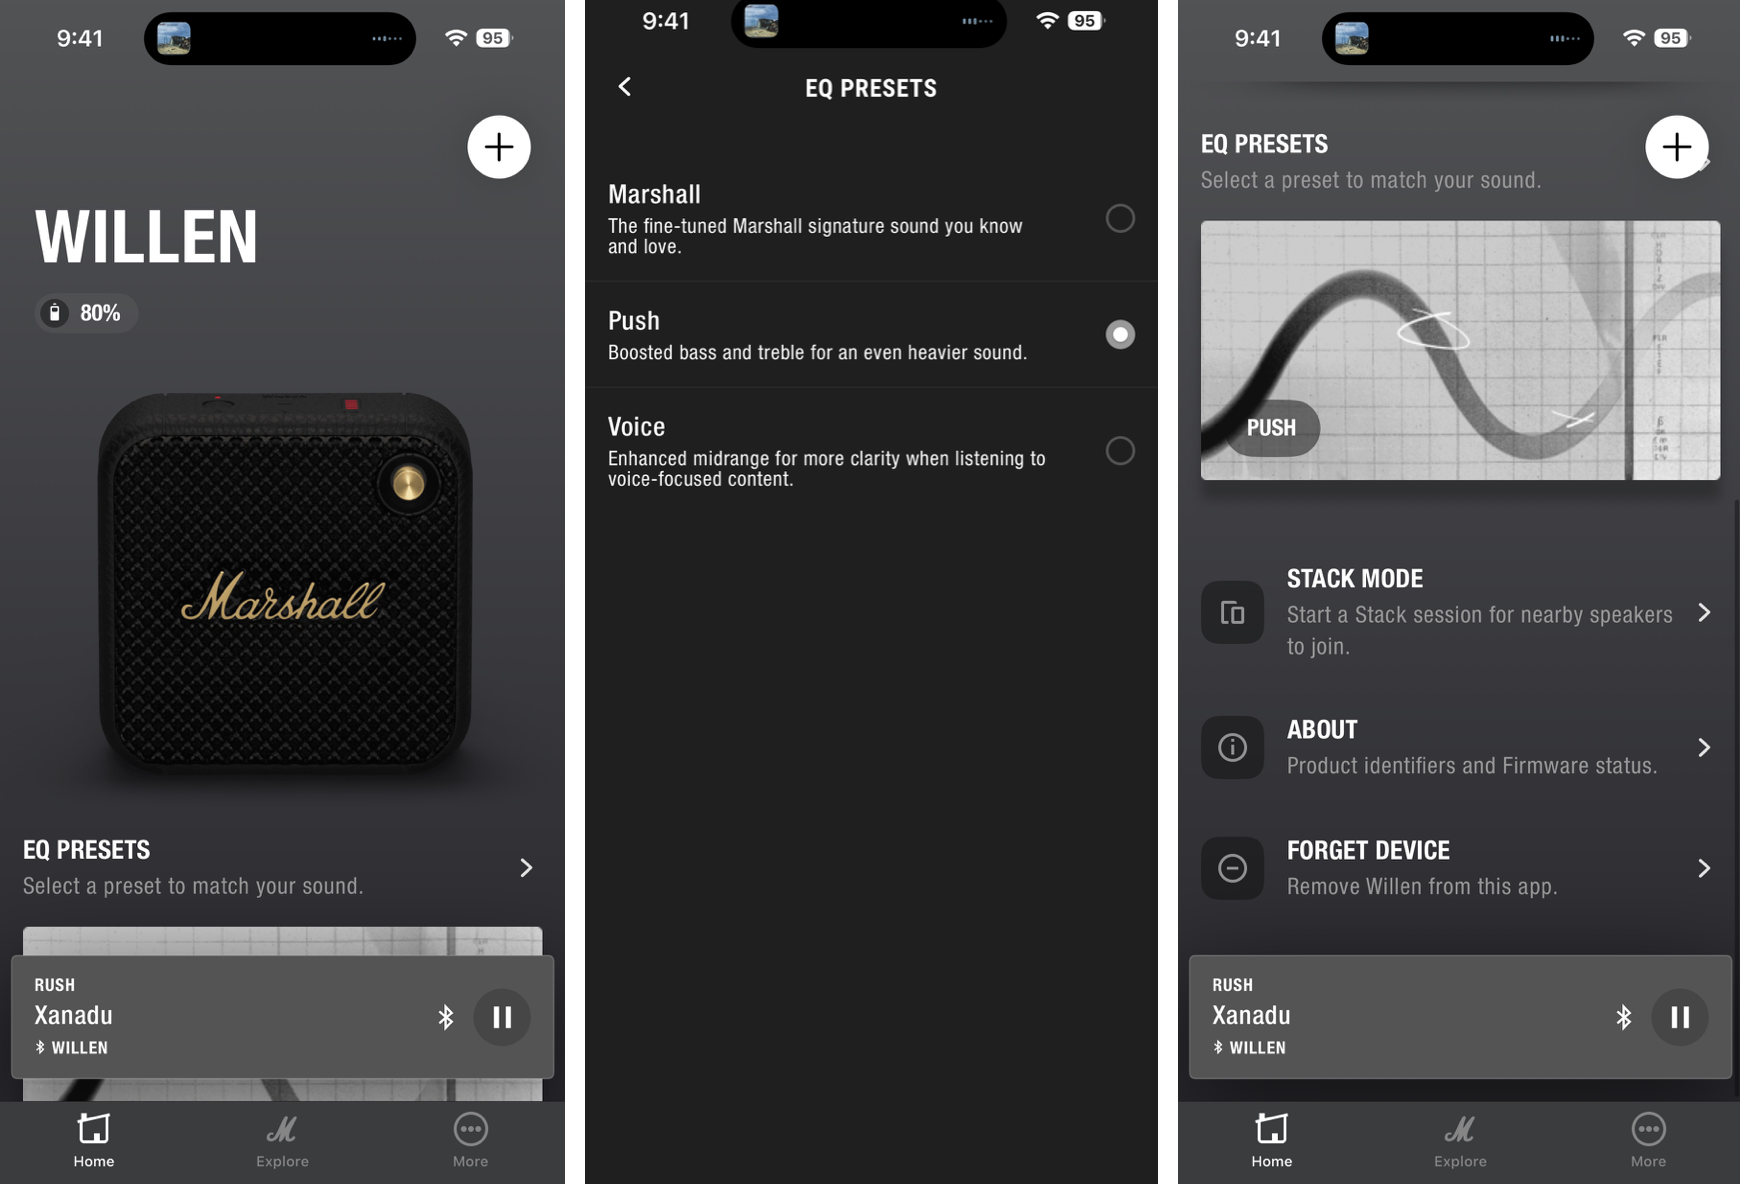 A screen shot of the Marshall Bluetooth app while connected to the Willen speaker. Showing EQ and controls options.